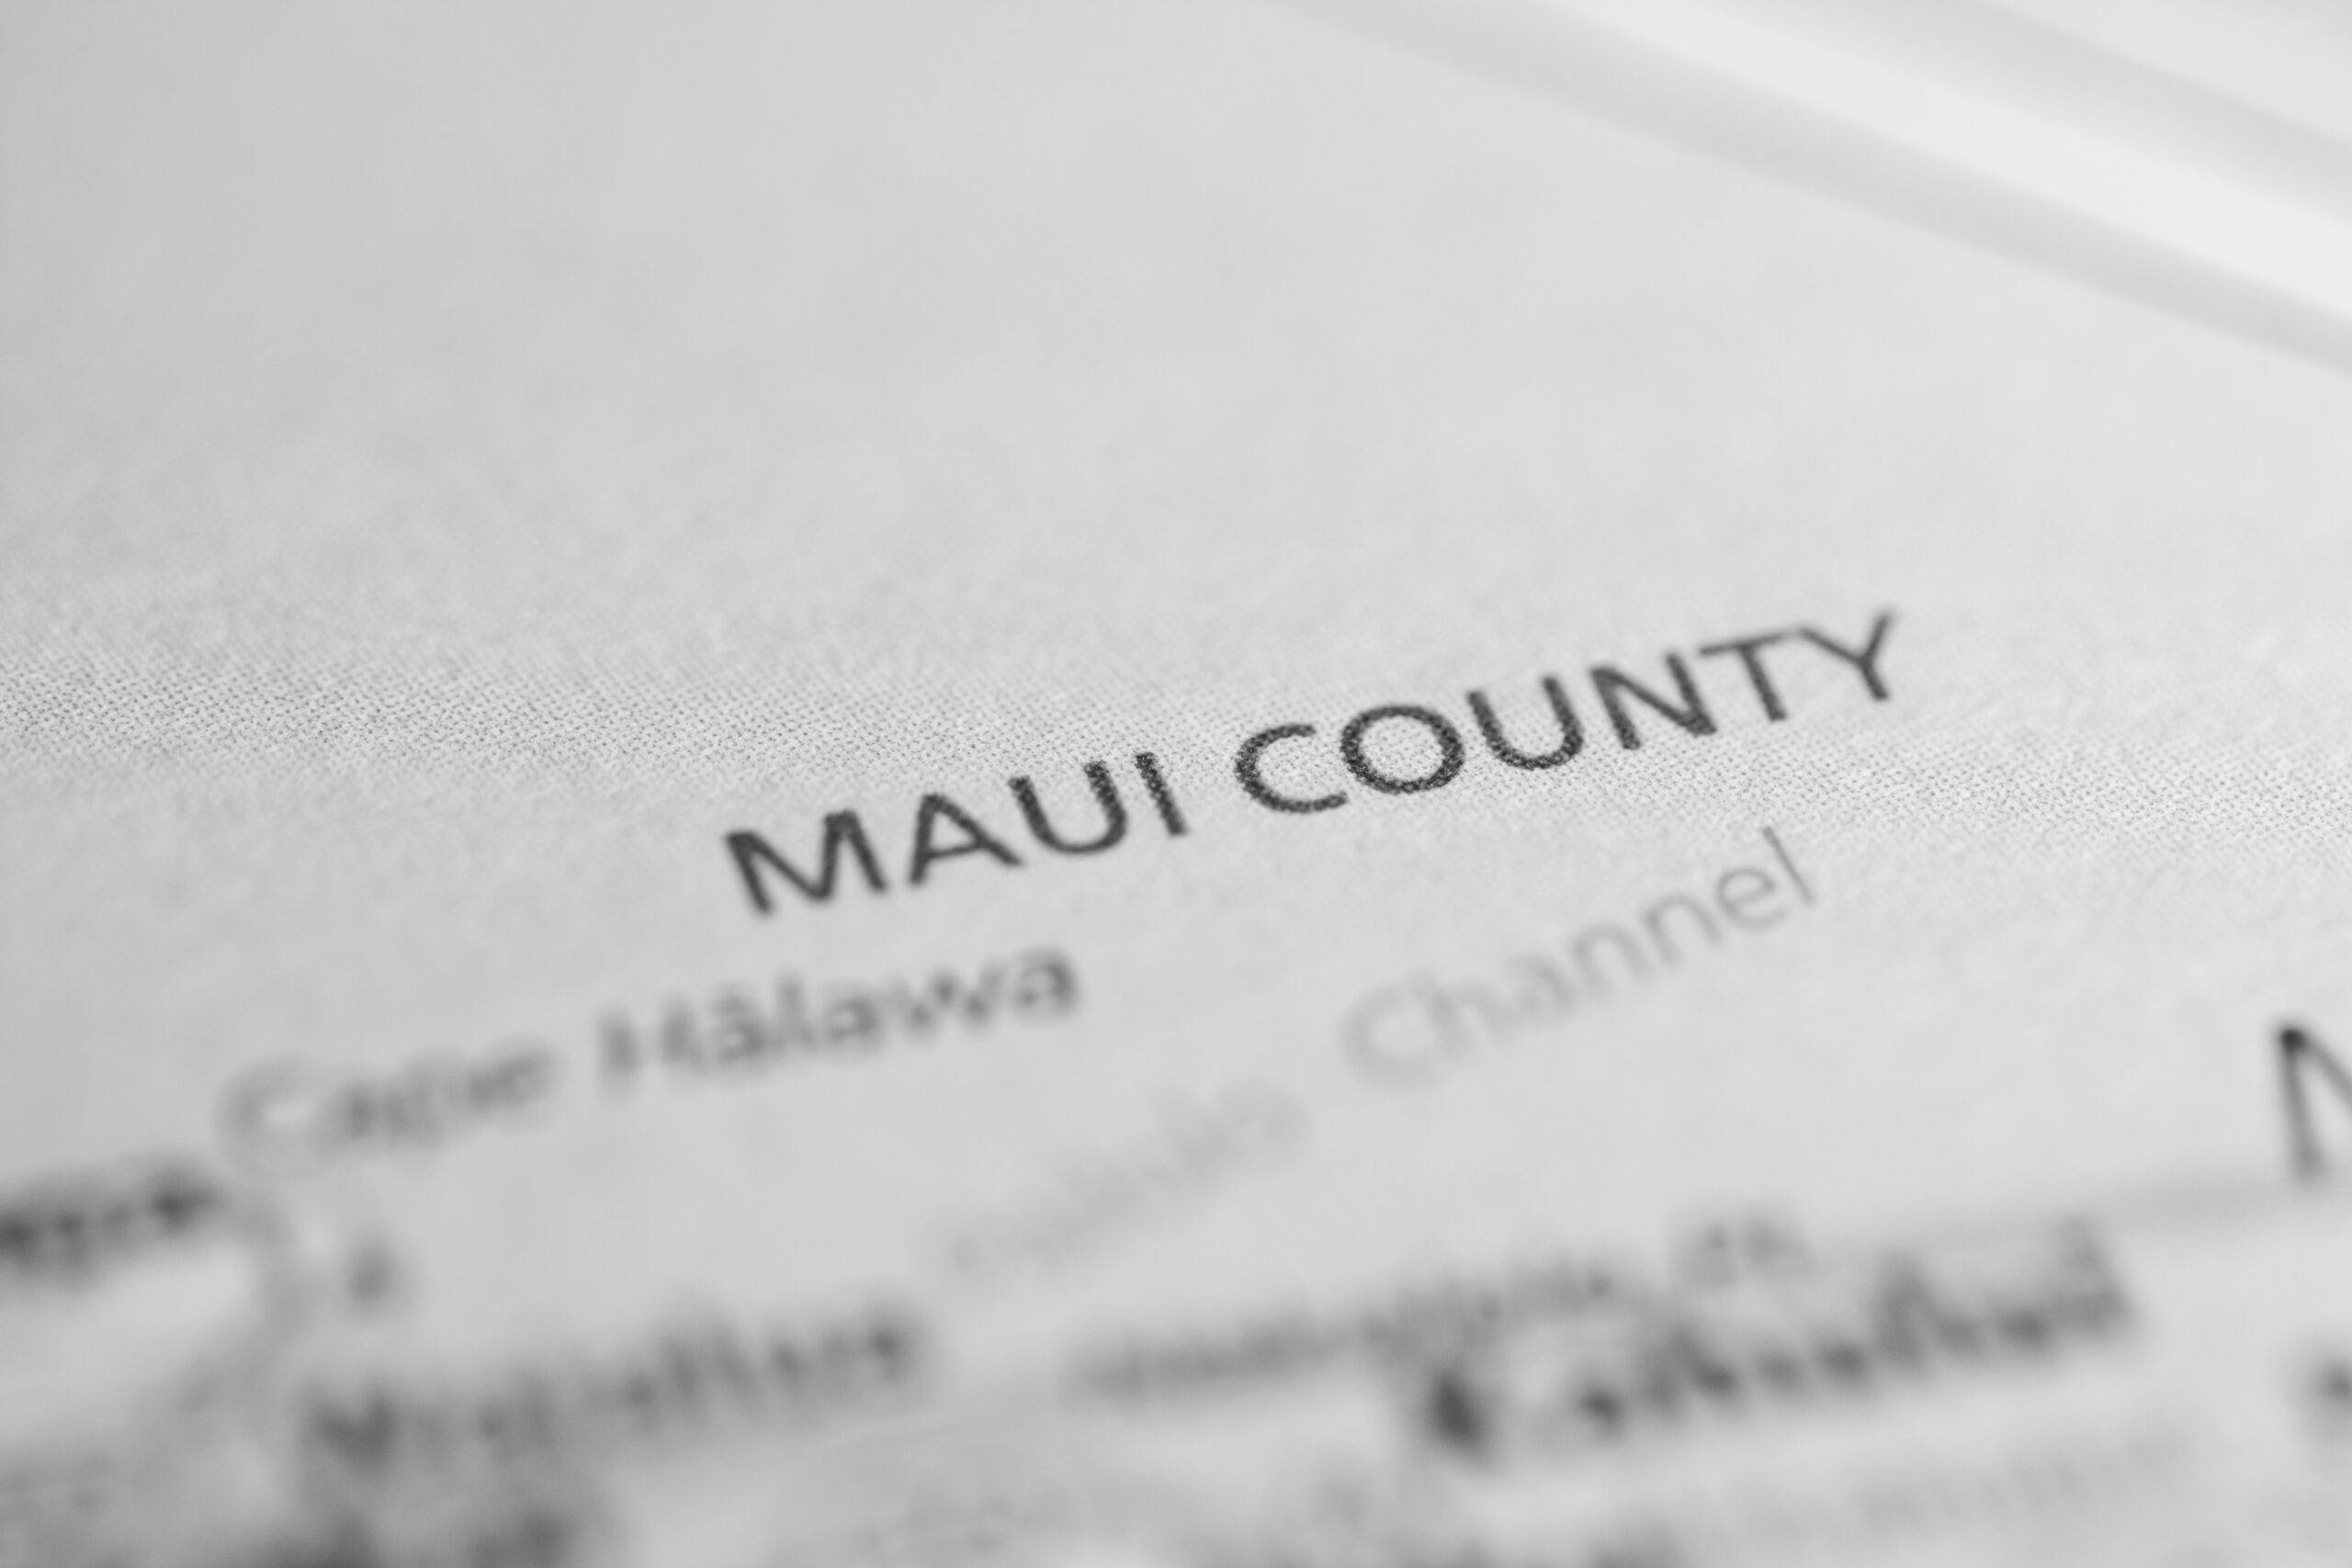 Baron & Budd Files Lawsuit on Behalf of Maui County Against HECO for Civil Damages Caused by the Maui Fires